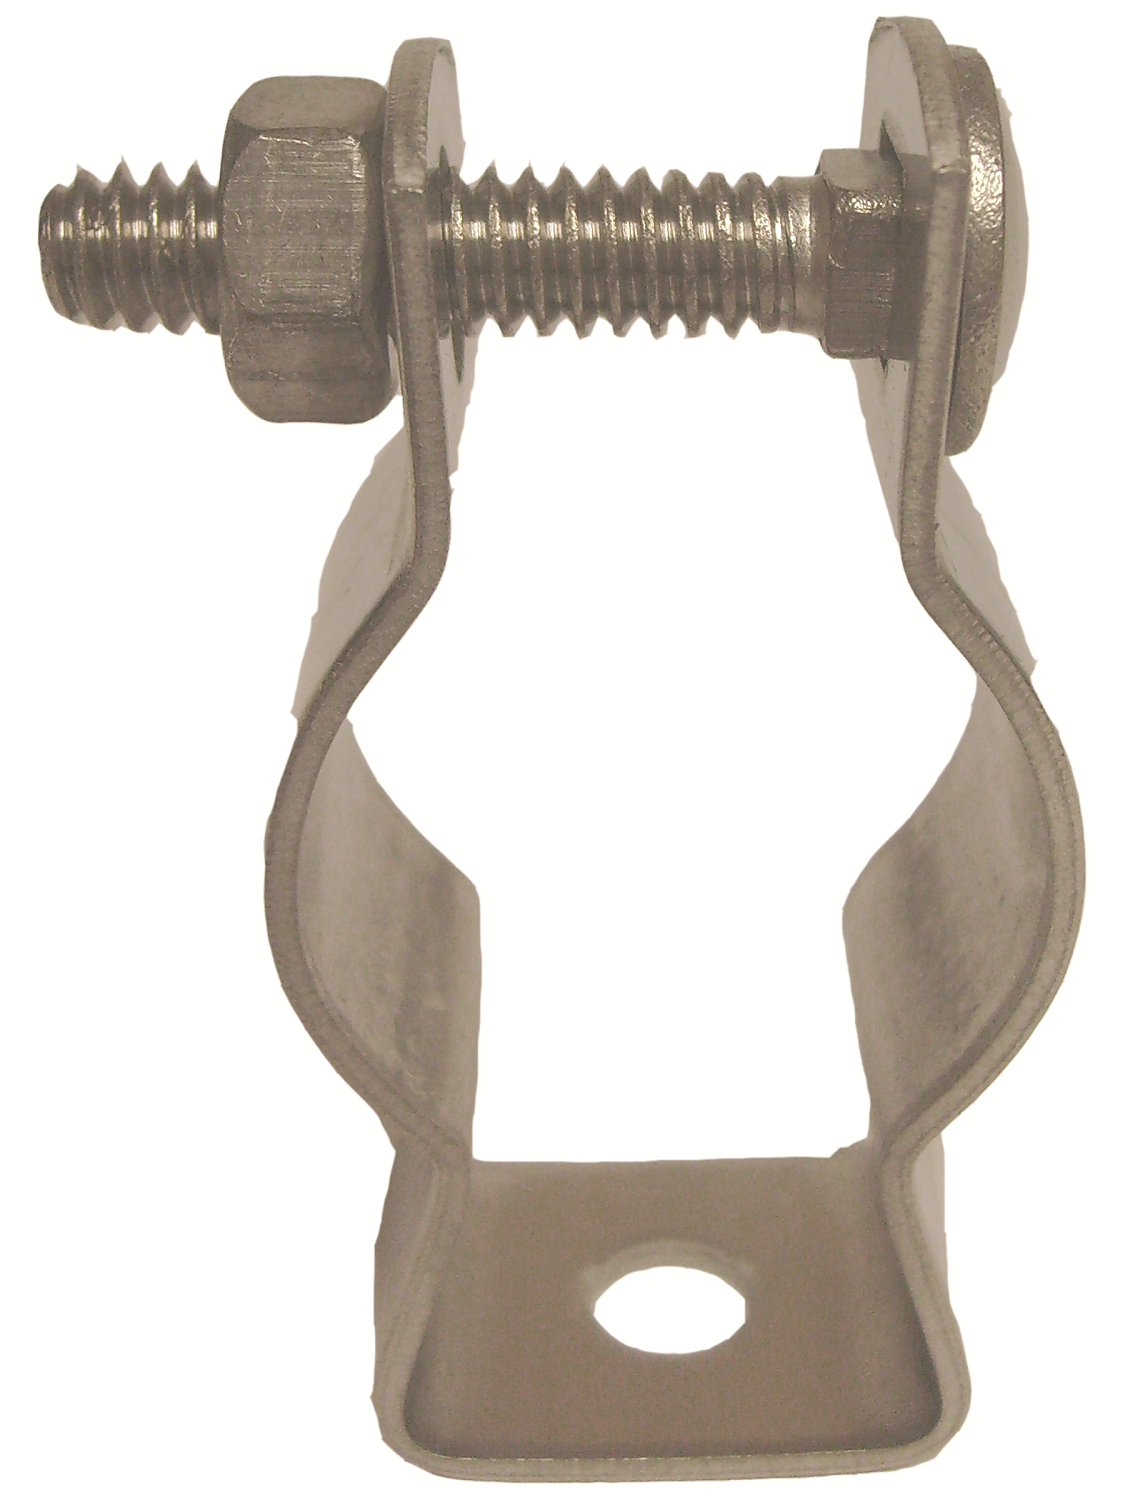 Allied Tube & Conduit HCS2KON Conduit Hanger With Nut and Bolt, 1 in Conduit, 60 lb Load, Carbon Steel